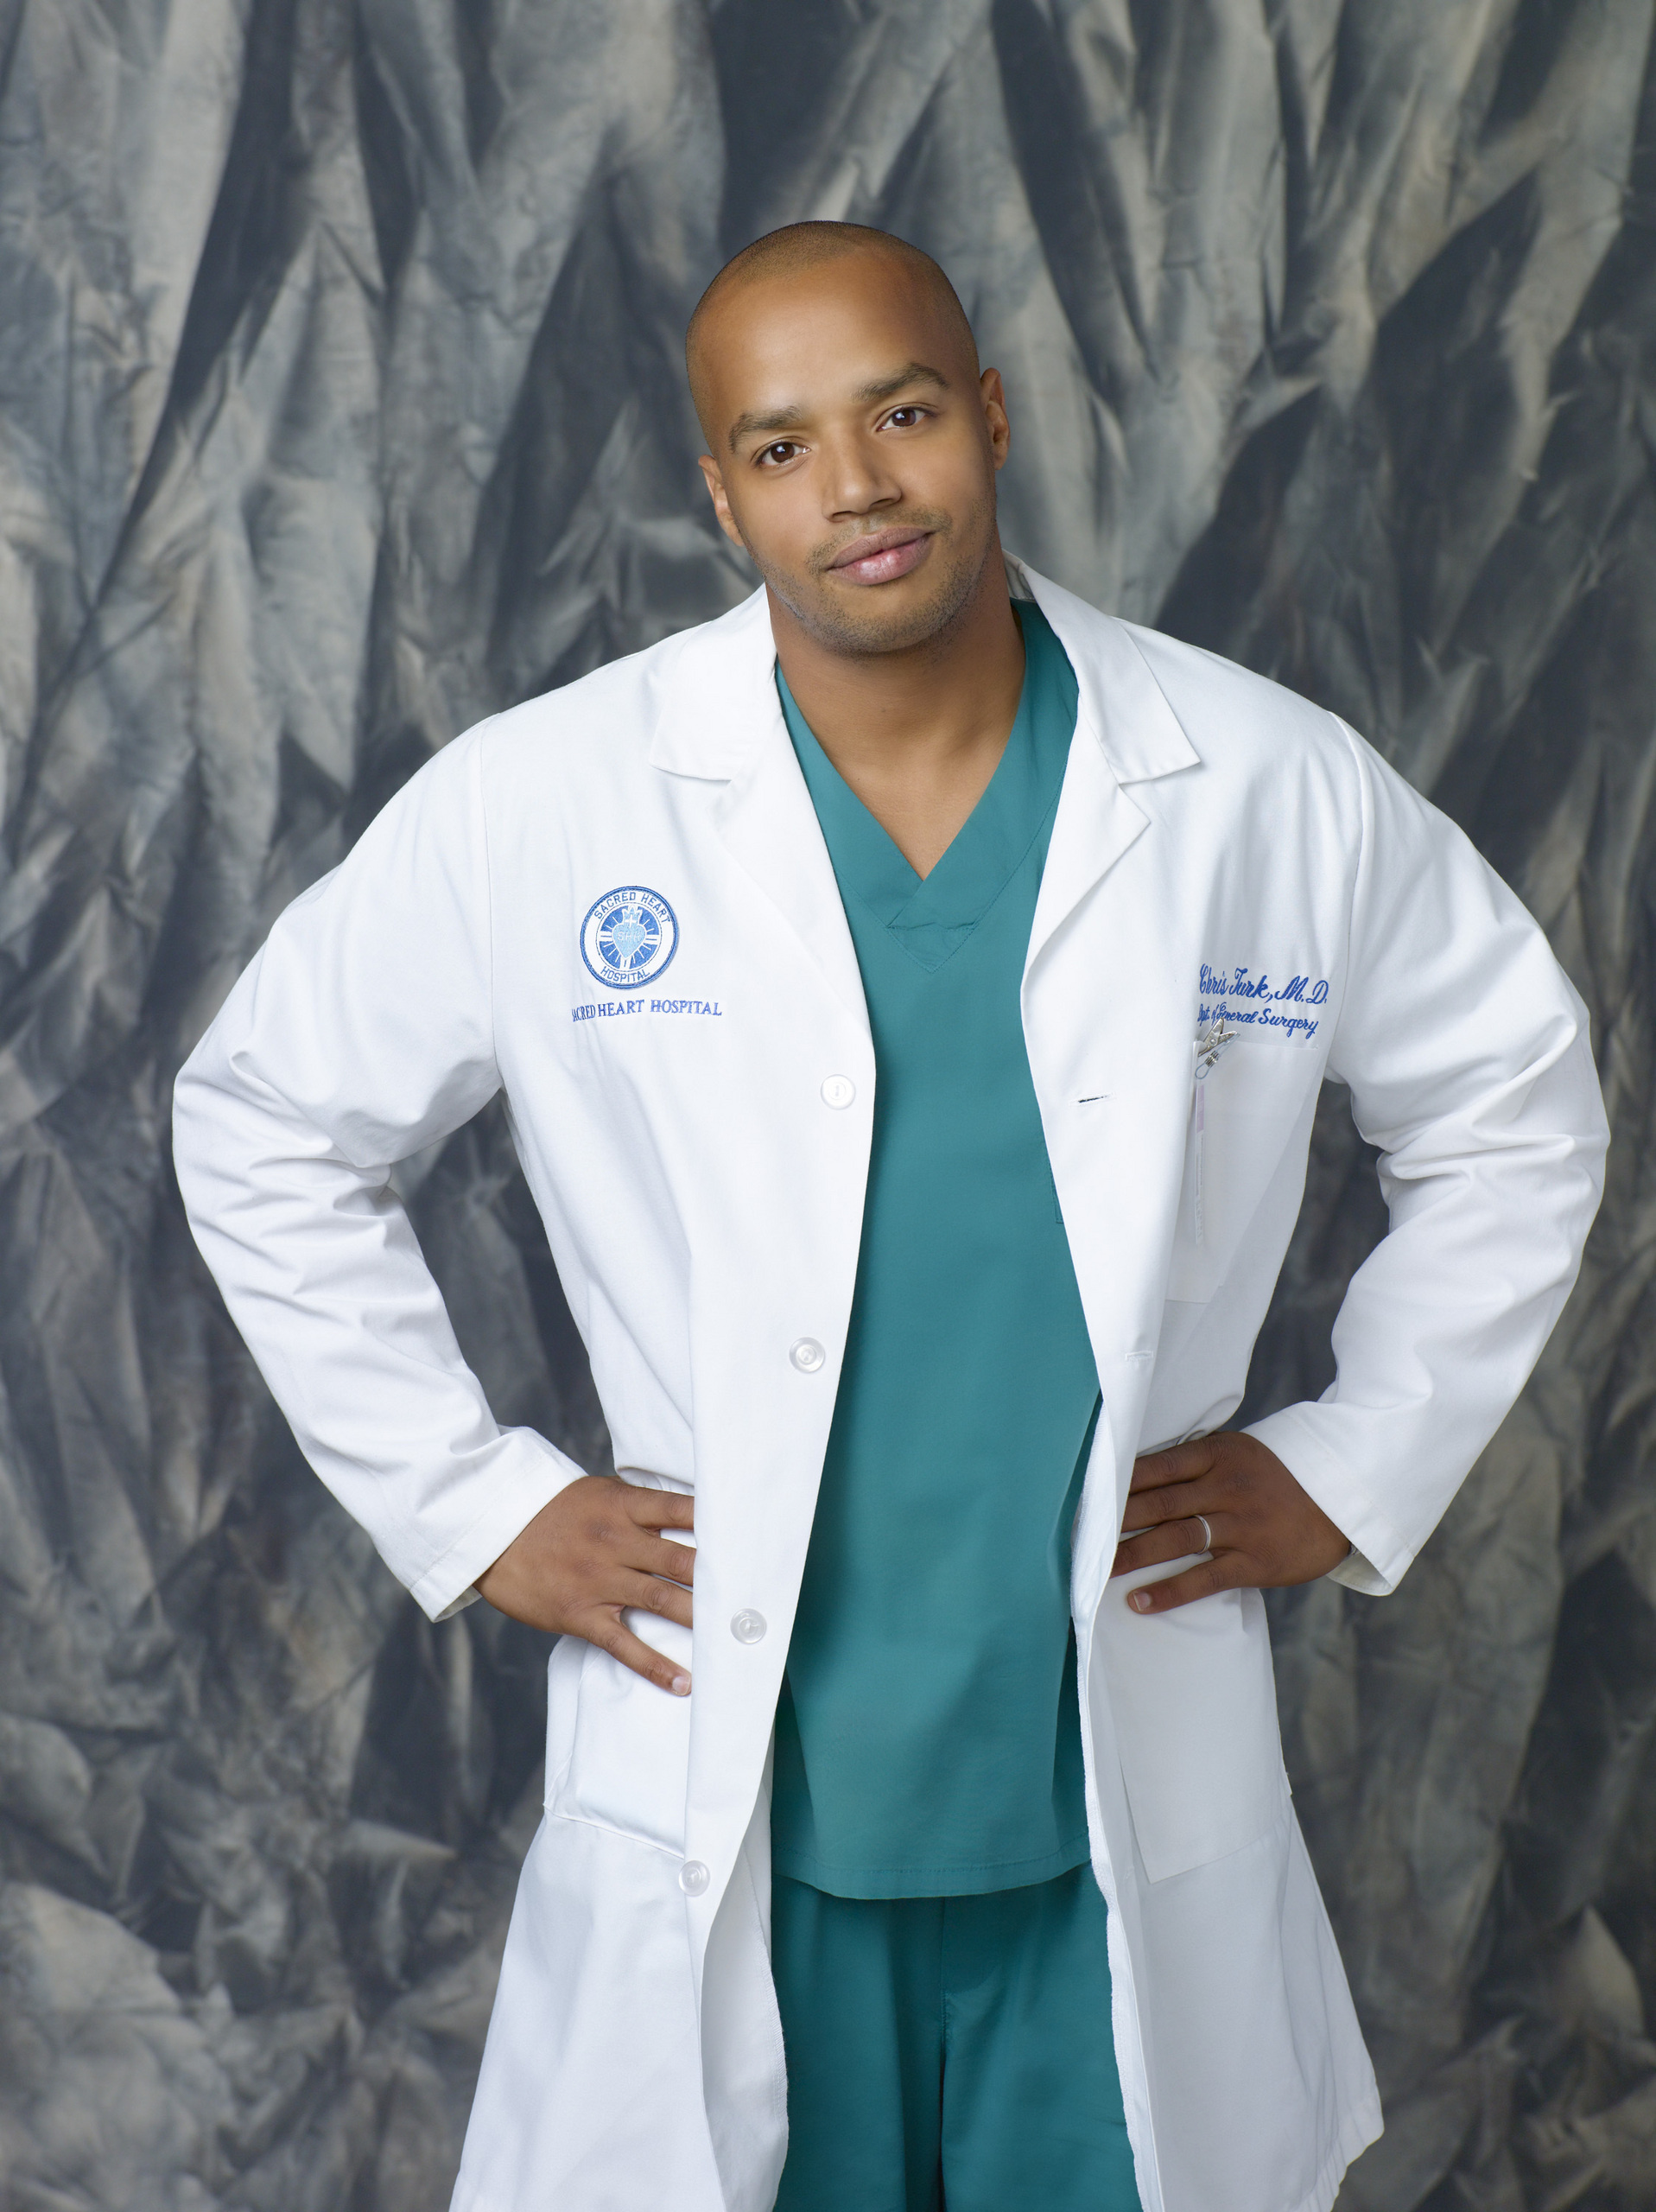 Scrubs (TV Series): Dr. Christopher Duncan Turk, The Chief of Surgery at New Sacred Heart Hospital. 1920x2560 HD Background.